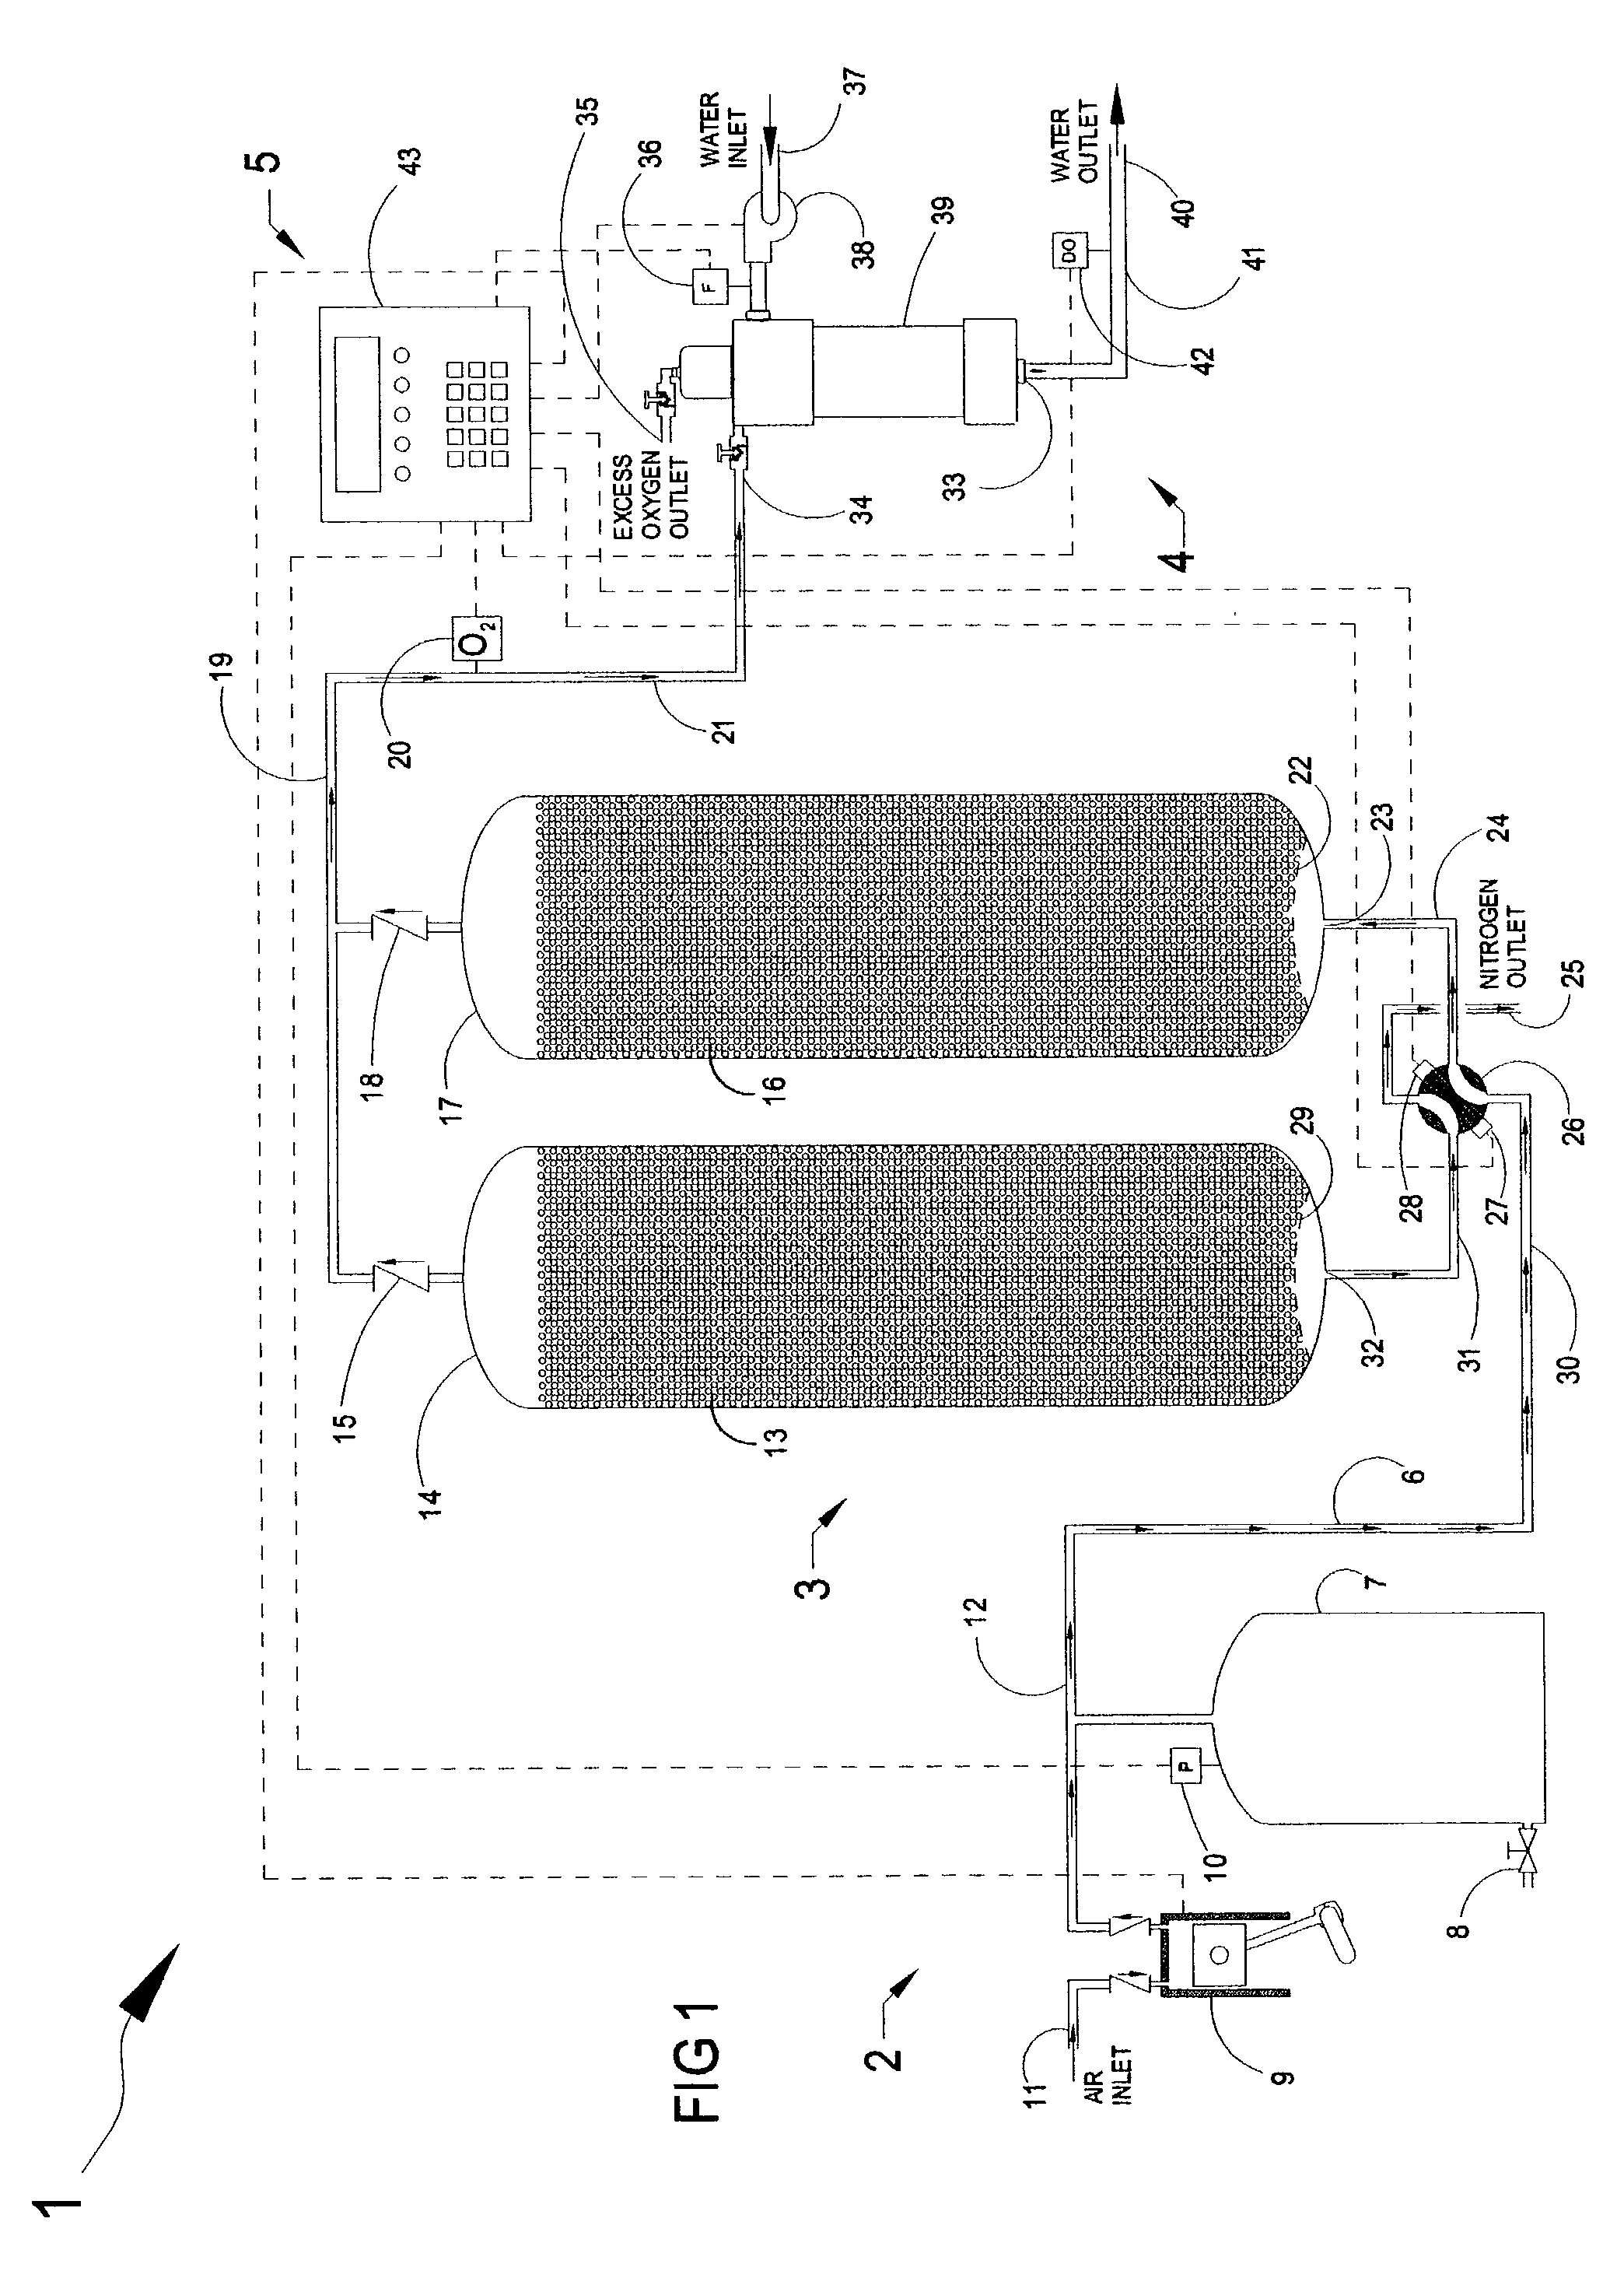 Methods and apparatus for supplying high concentrations of dissolved oxygen and ozone for chemical and biological processes